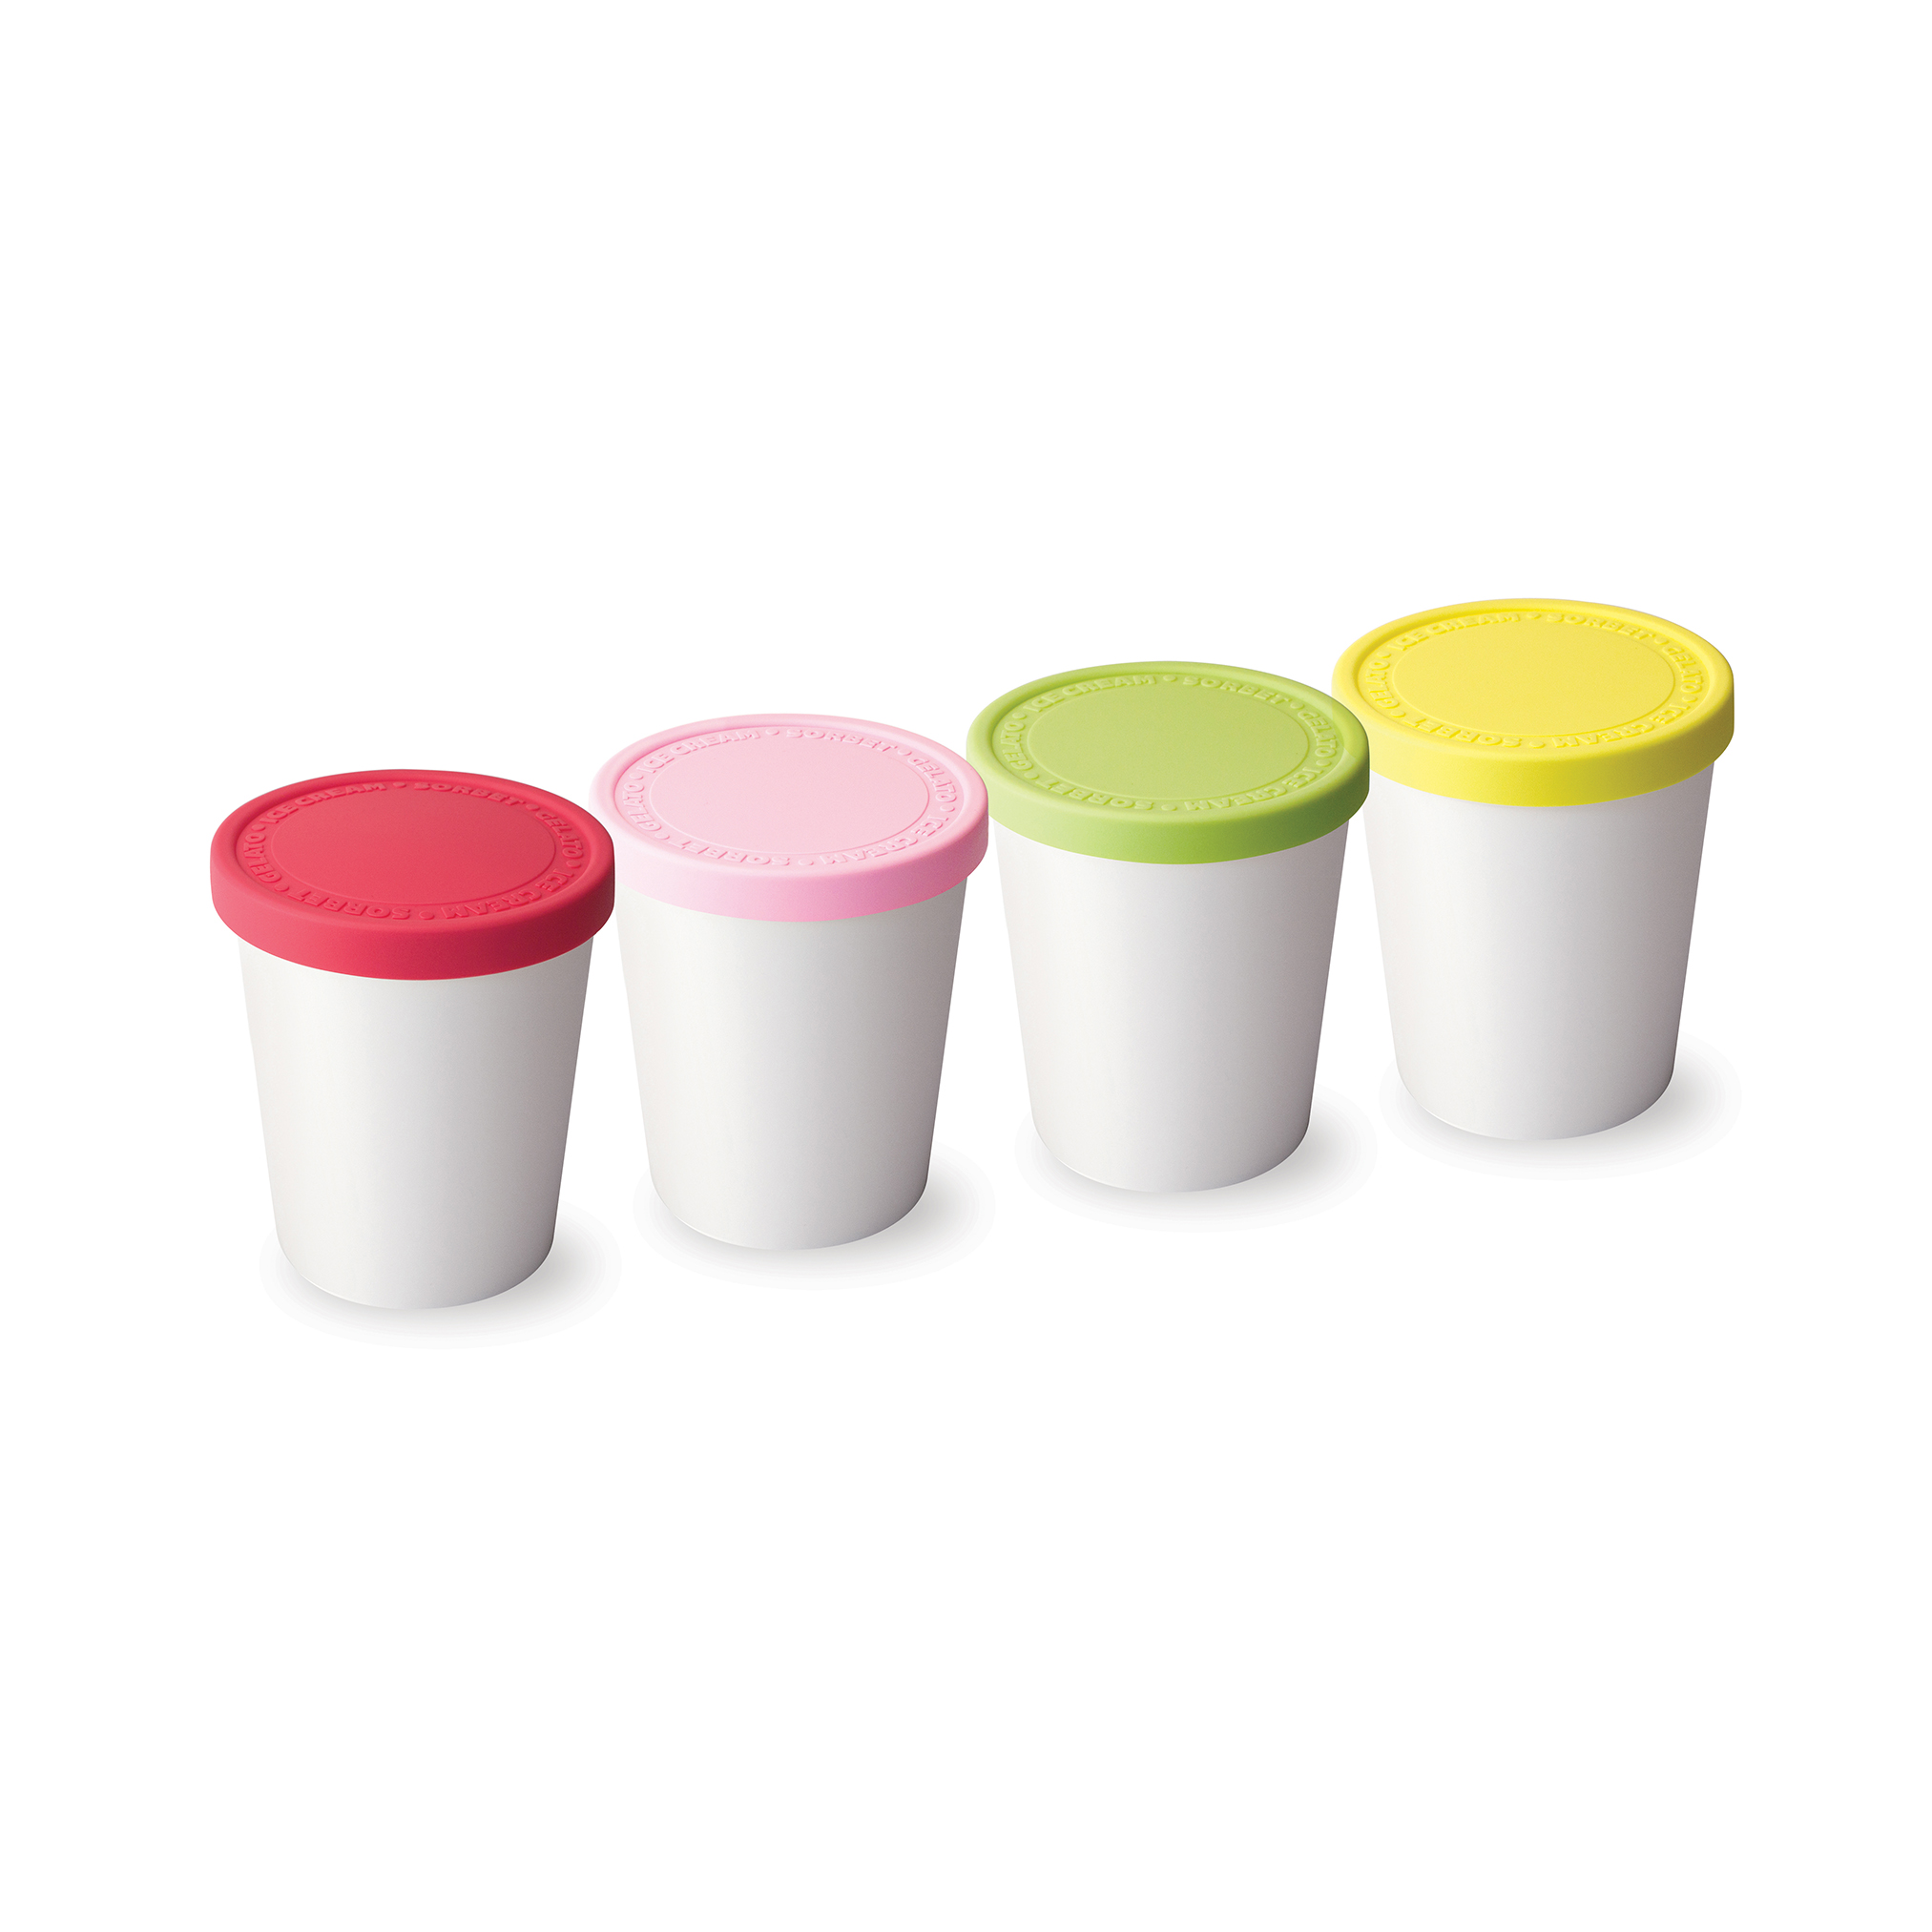 https://www.momjunction.com/wp-content/uploads/product-images/tovolo-sweet-treat-mini-tubs_afl208.jpg